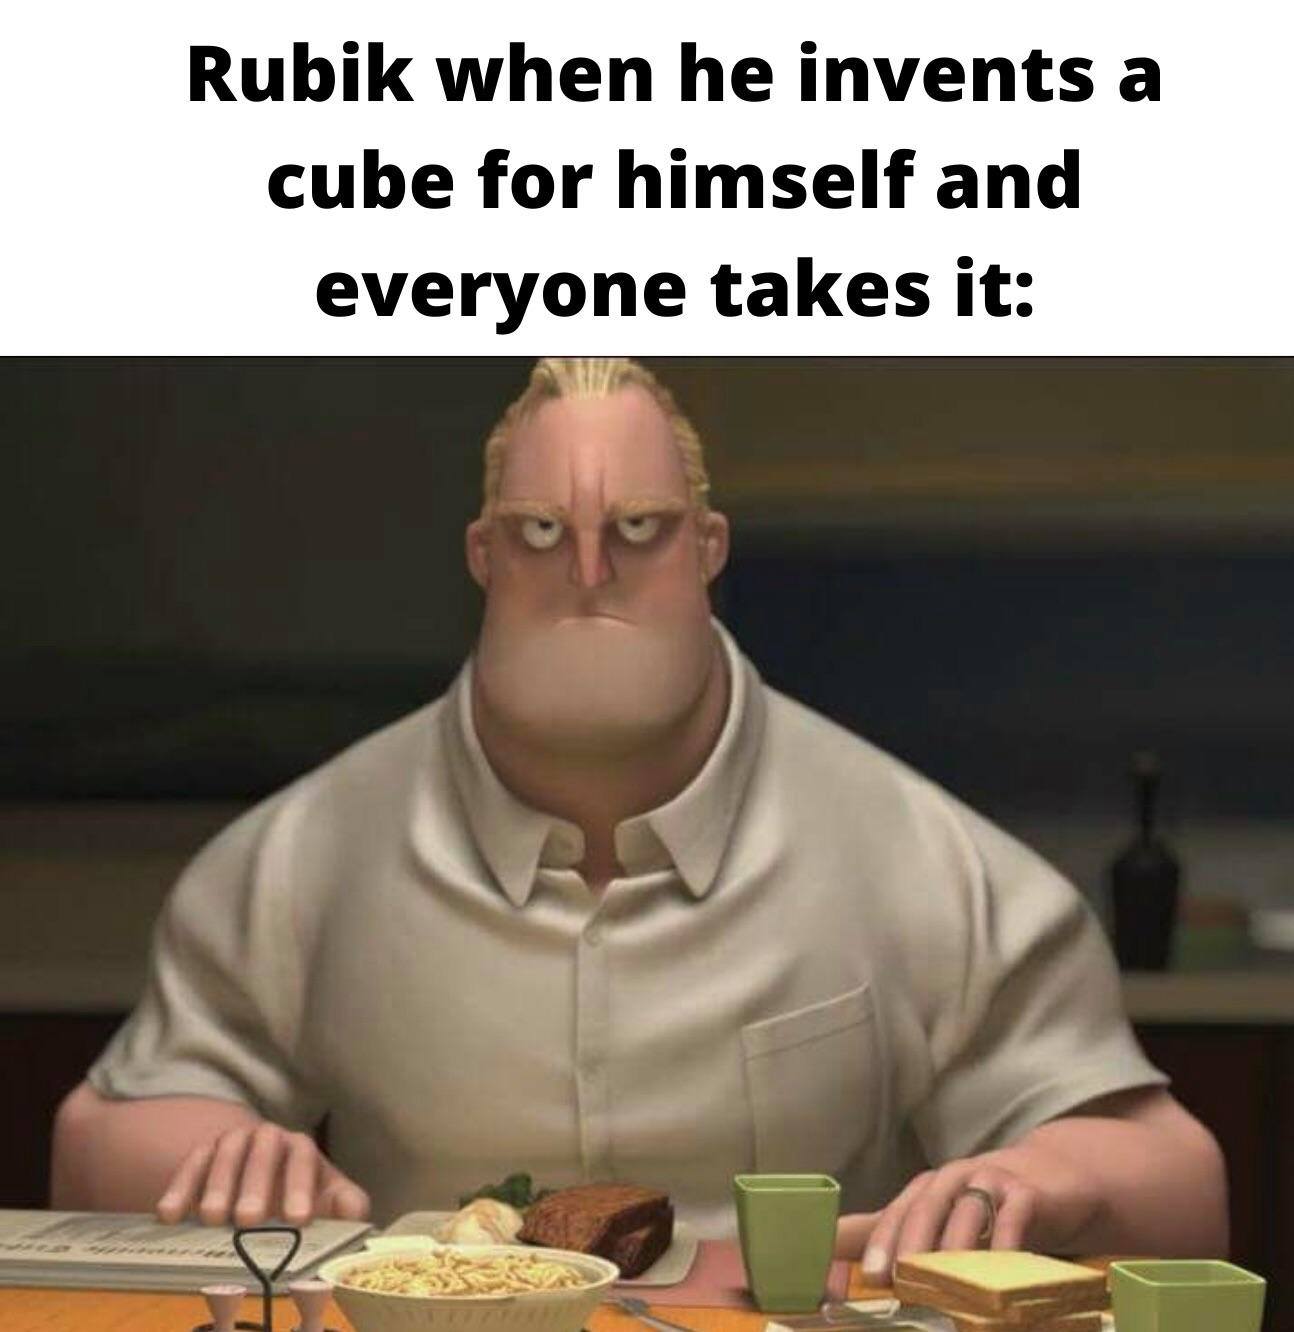 funny gaming memes - interrupting meme - Rubik when he invents a cube for himself and everyone takes it